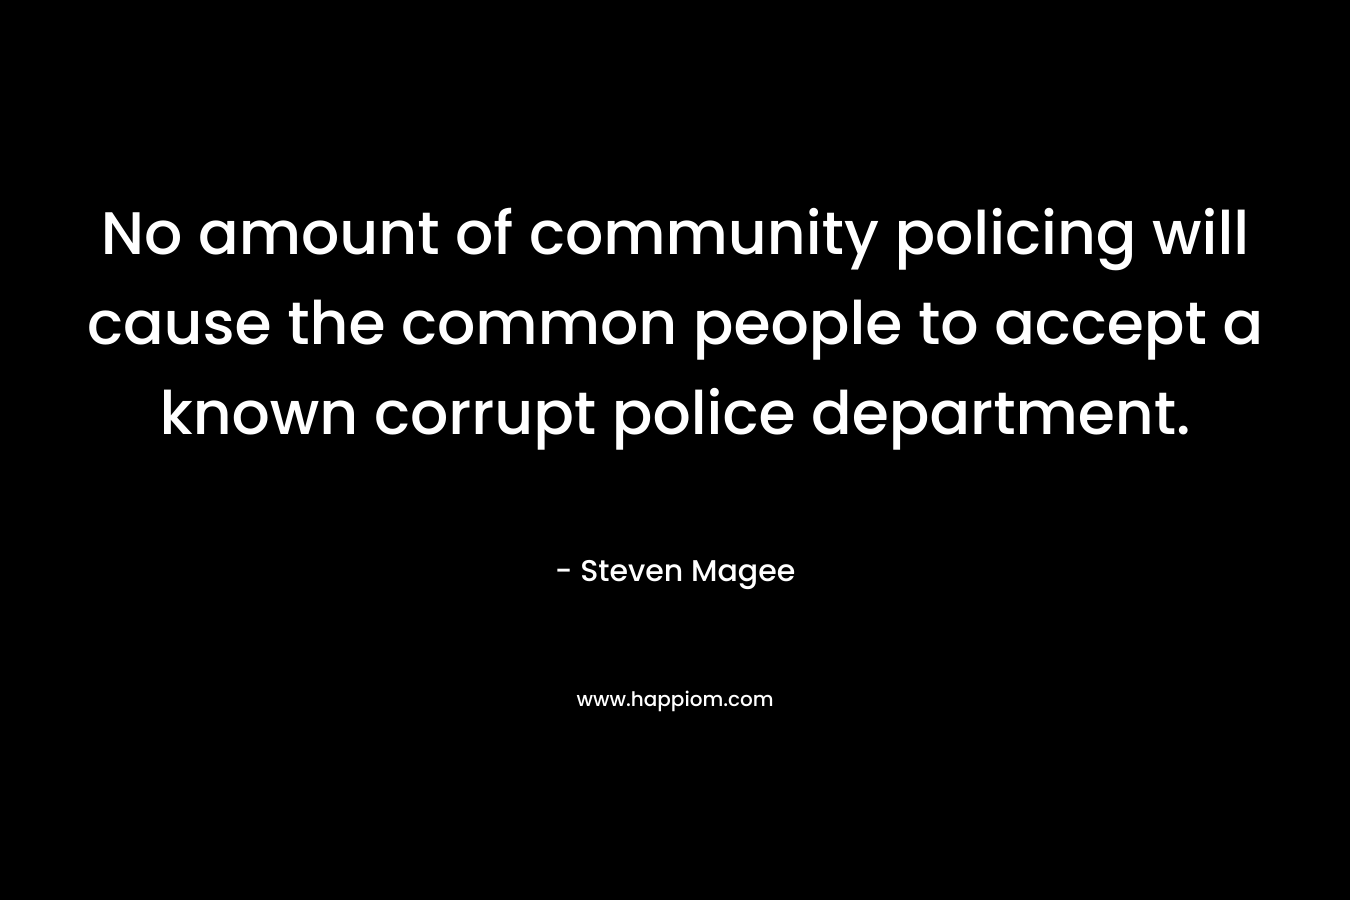 No amount of community policing will cause the common people to accept a known corrupt police department.